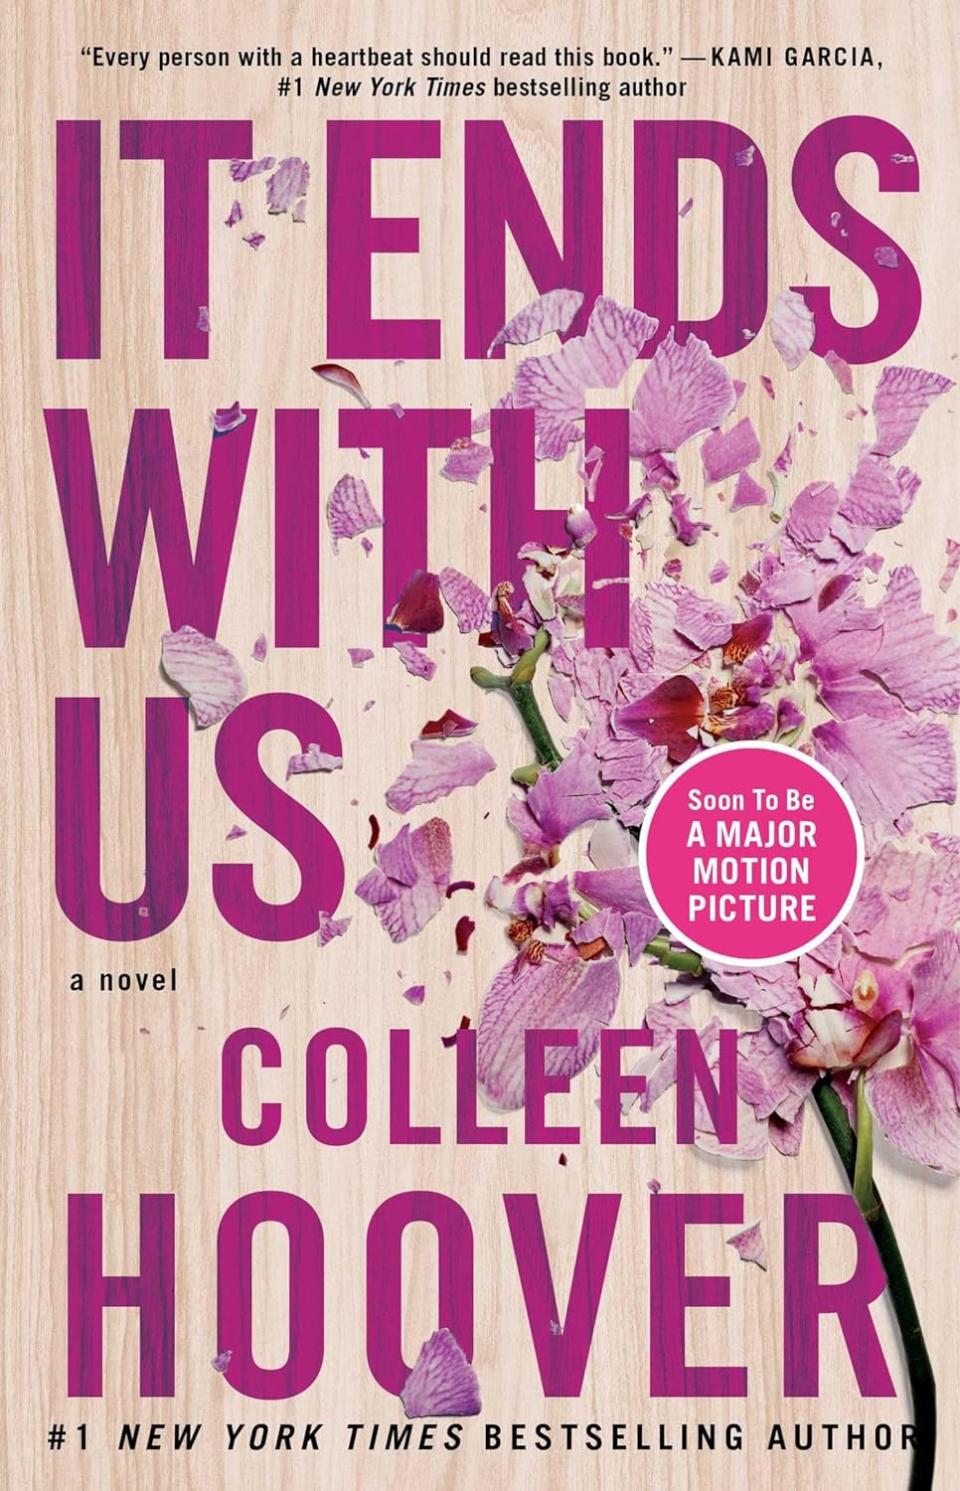 Read 'It Ends With Us' Book: Colleen Hoover Novel Is 50% Off on Amazon